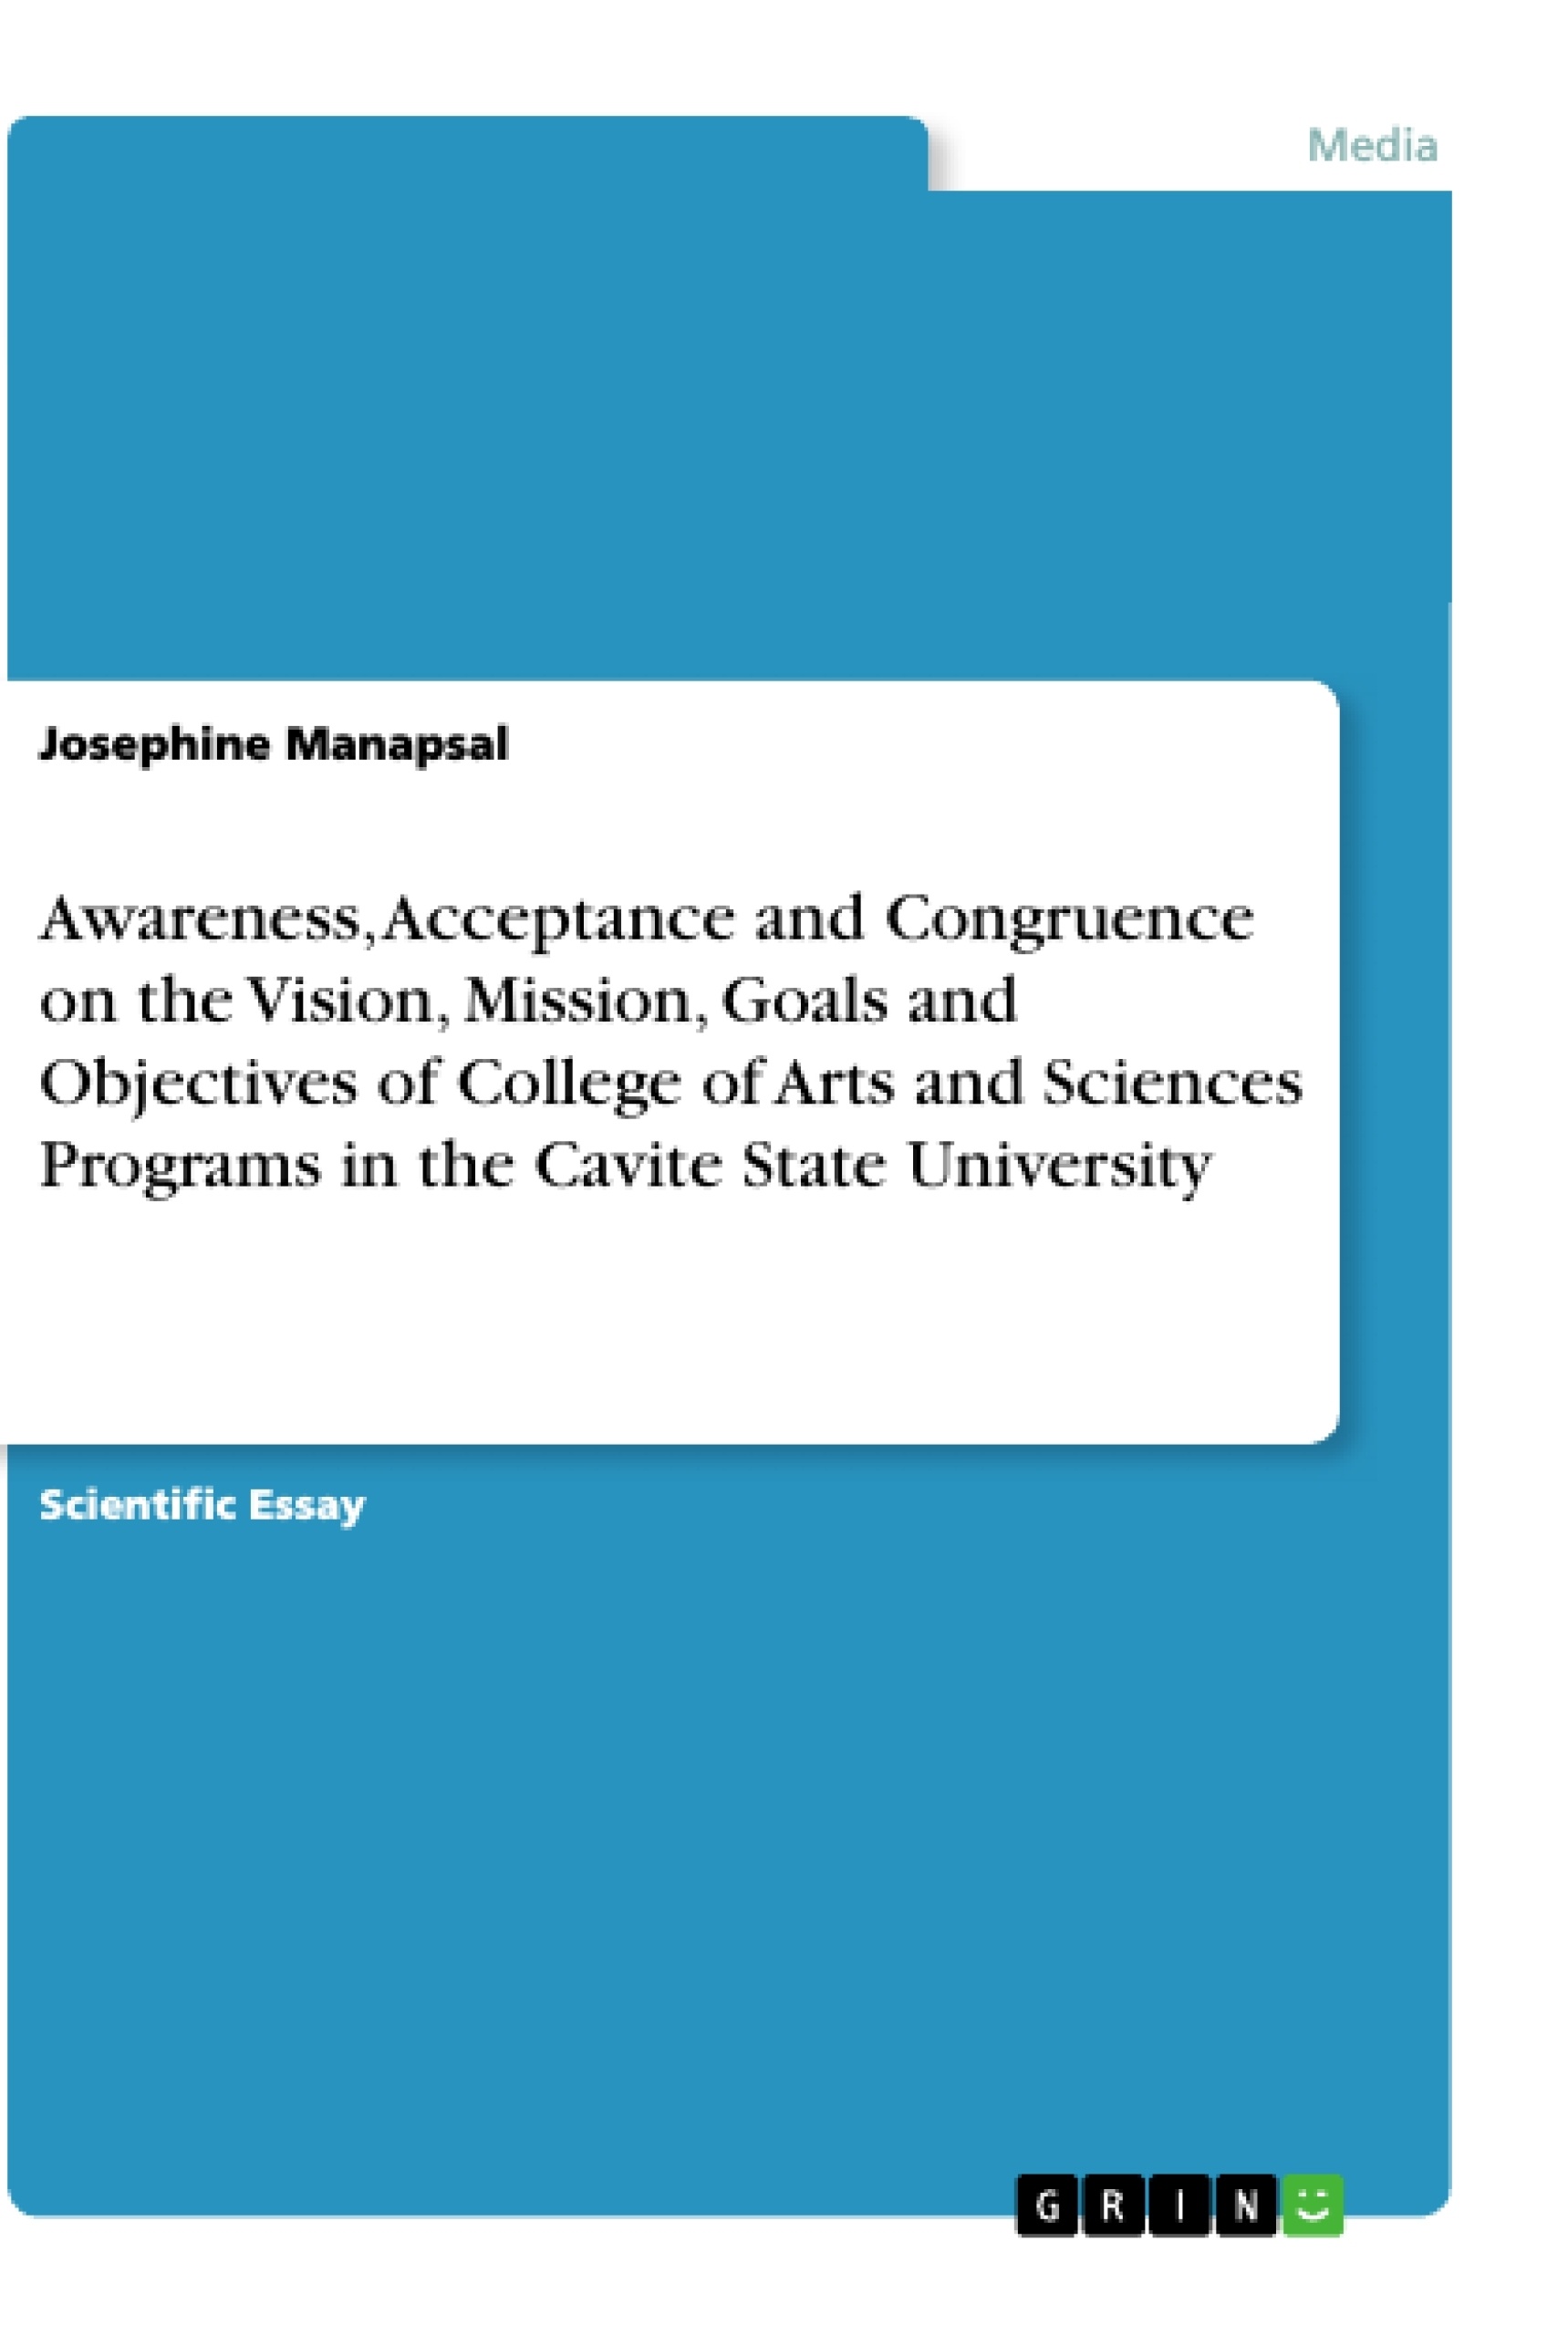 Title: Awareness, Acceptance and Congruence on the Vision, Mission, Goals and Objectives of College of Arts and Sciences Programs in the Cavite State University